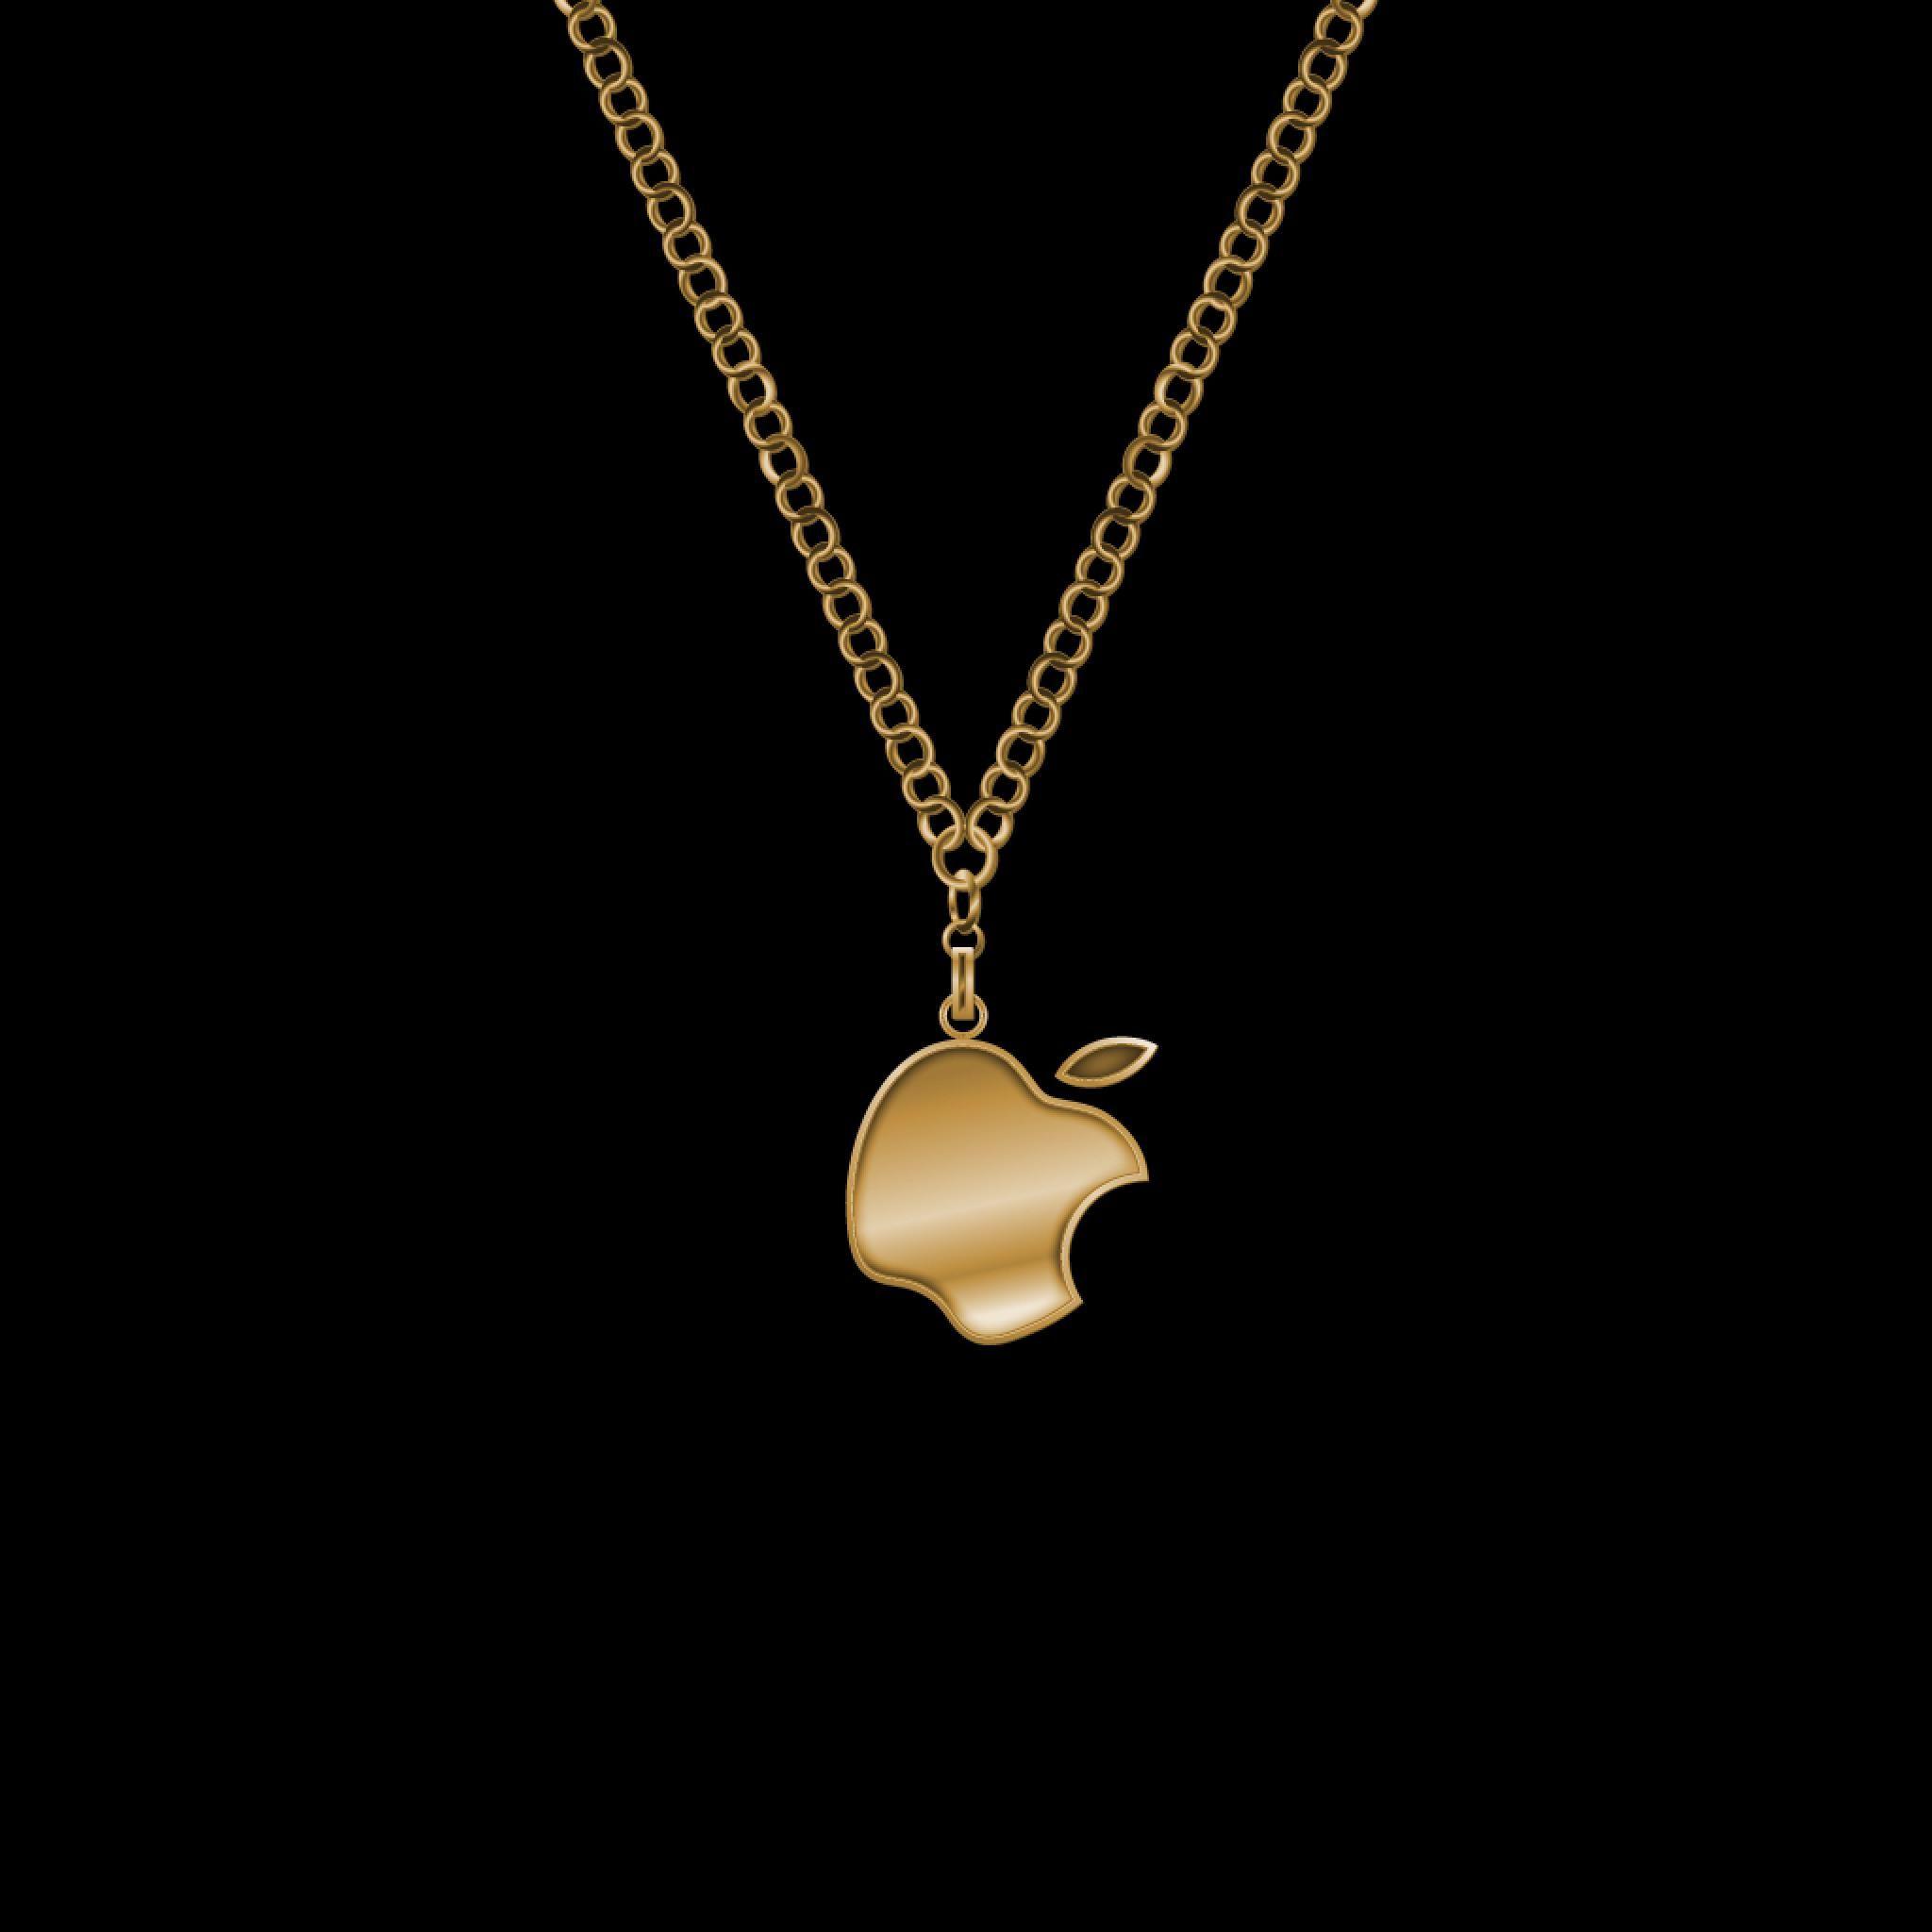 Computers Gold Chain iPhone HD Wallpaper Free